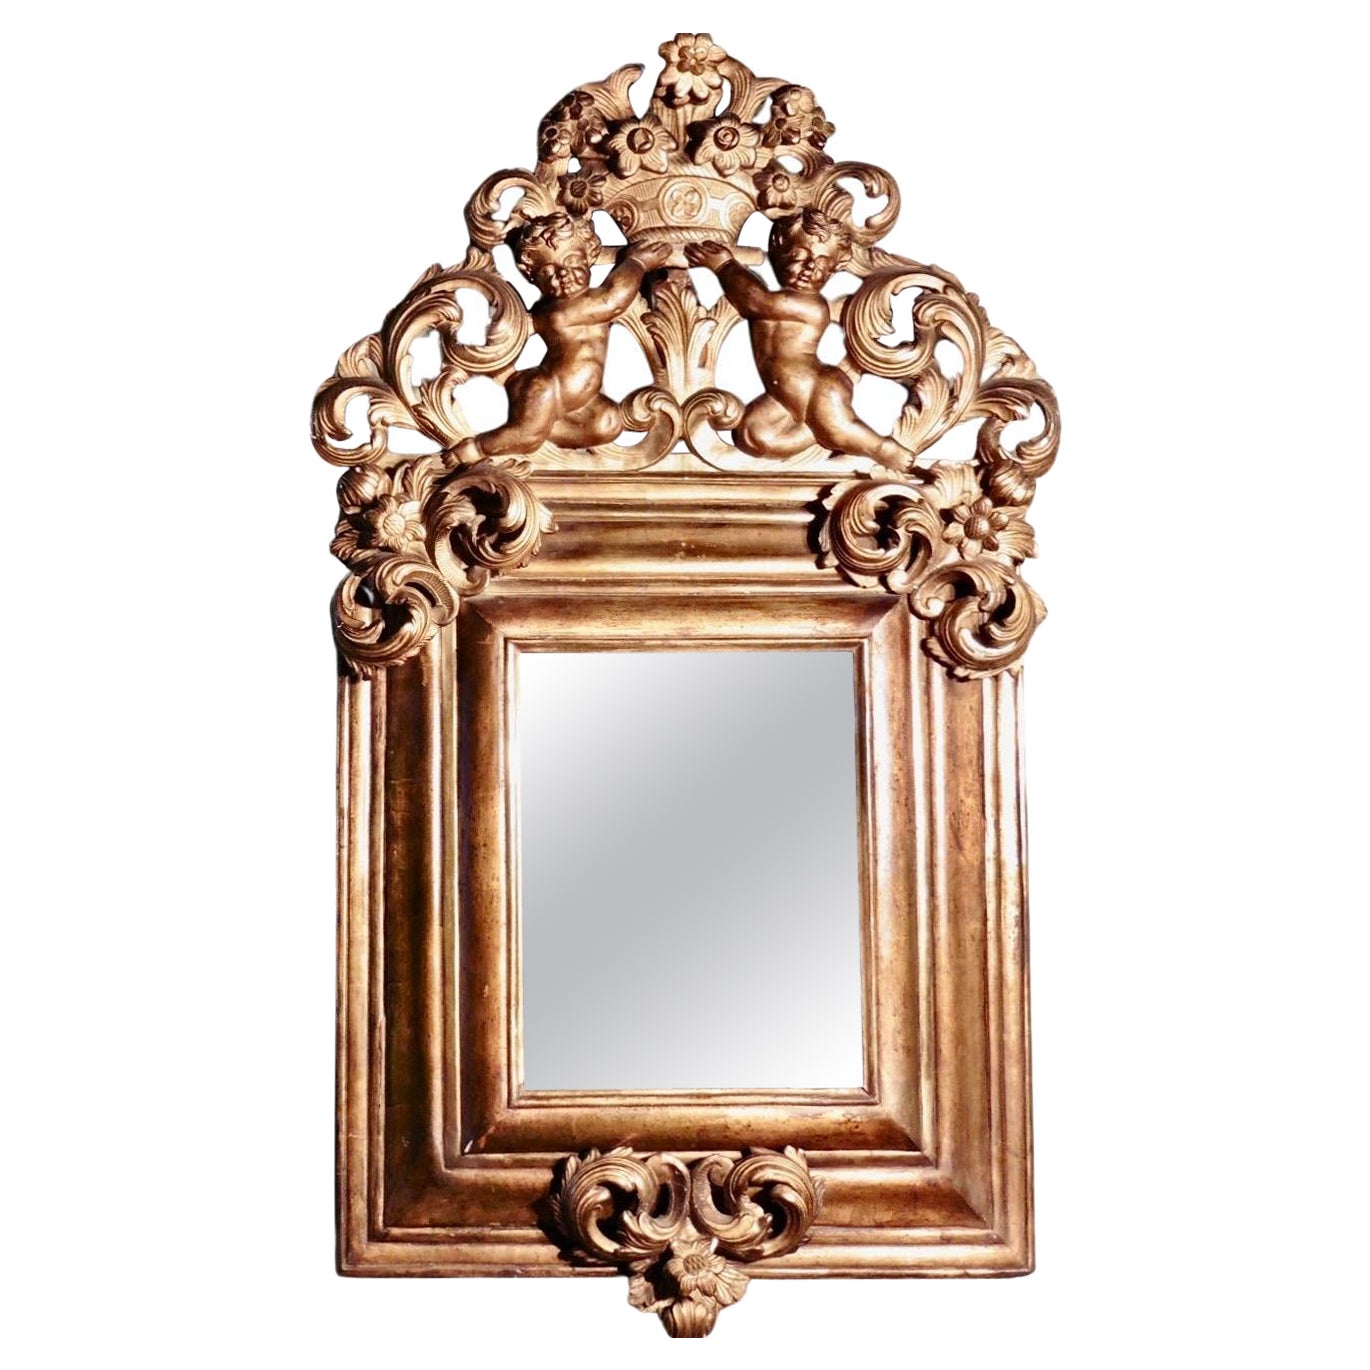 A Superb Large Early 19th Century Carved Gilt Mirror    